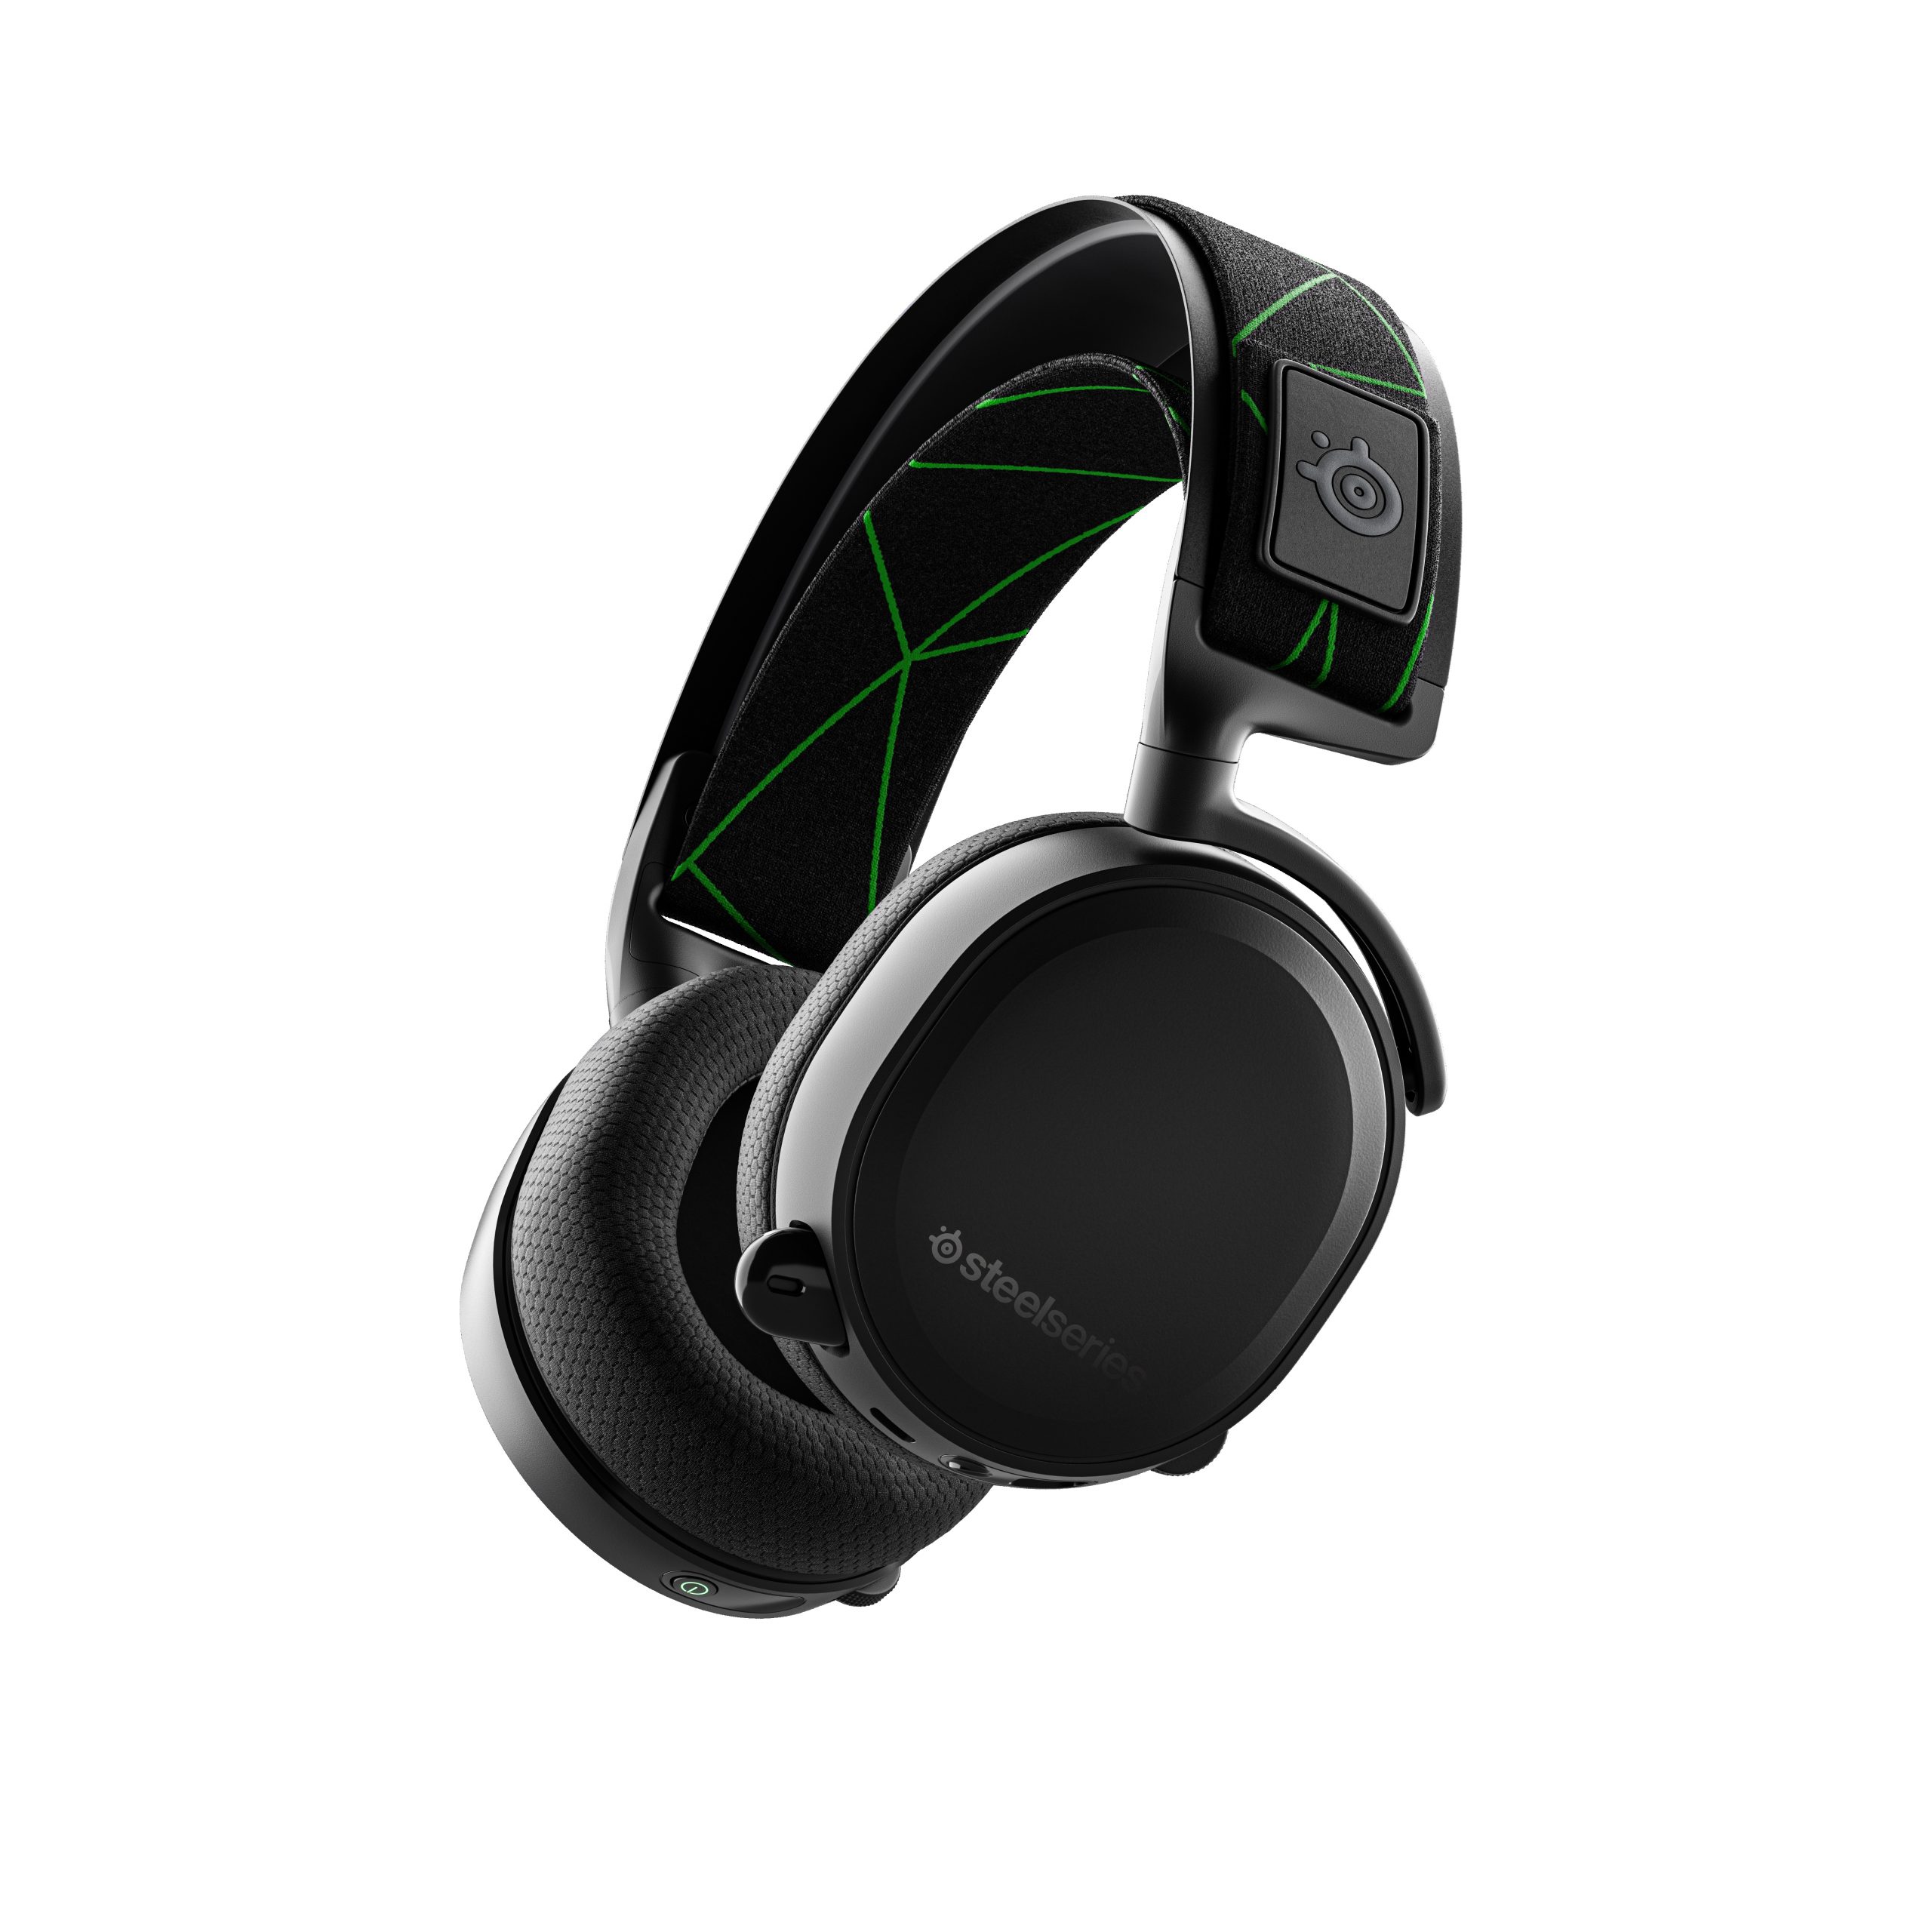 The SteelSeries Arctis 7X gaming headset in black against a white background.